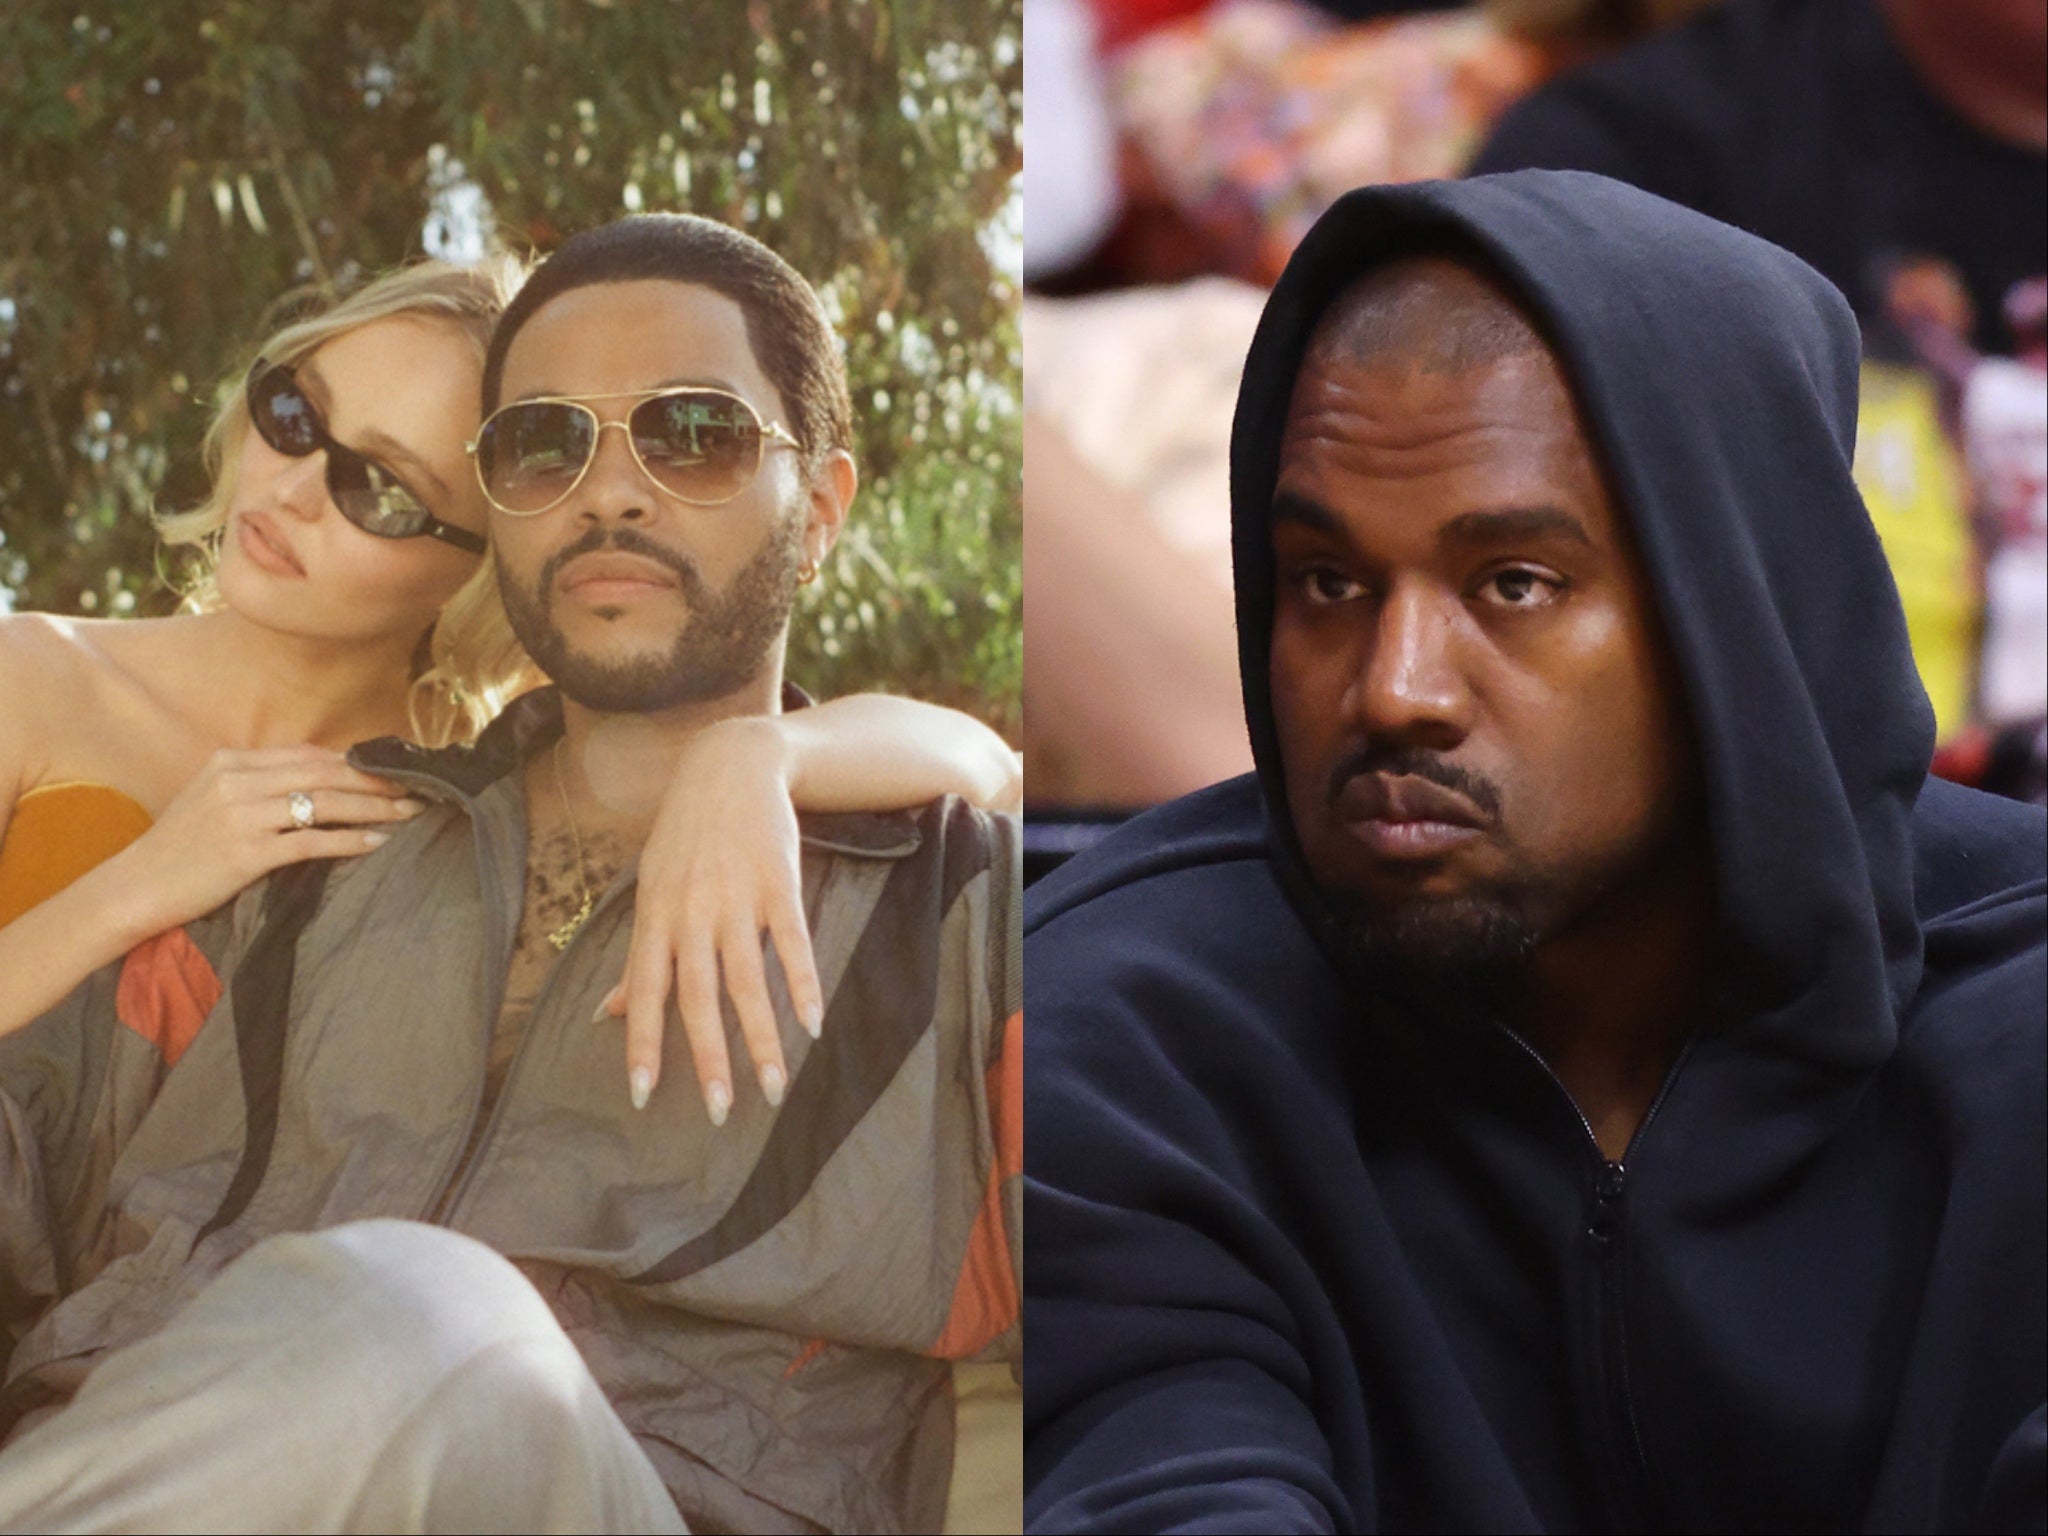 Lily-Rose Depp and The Weeknd in ‘The Idol’ and Kanye West (right)